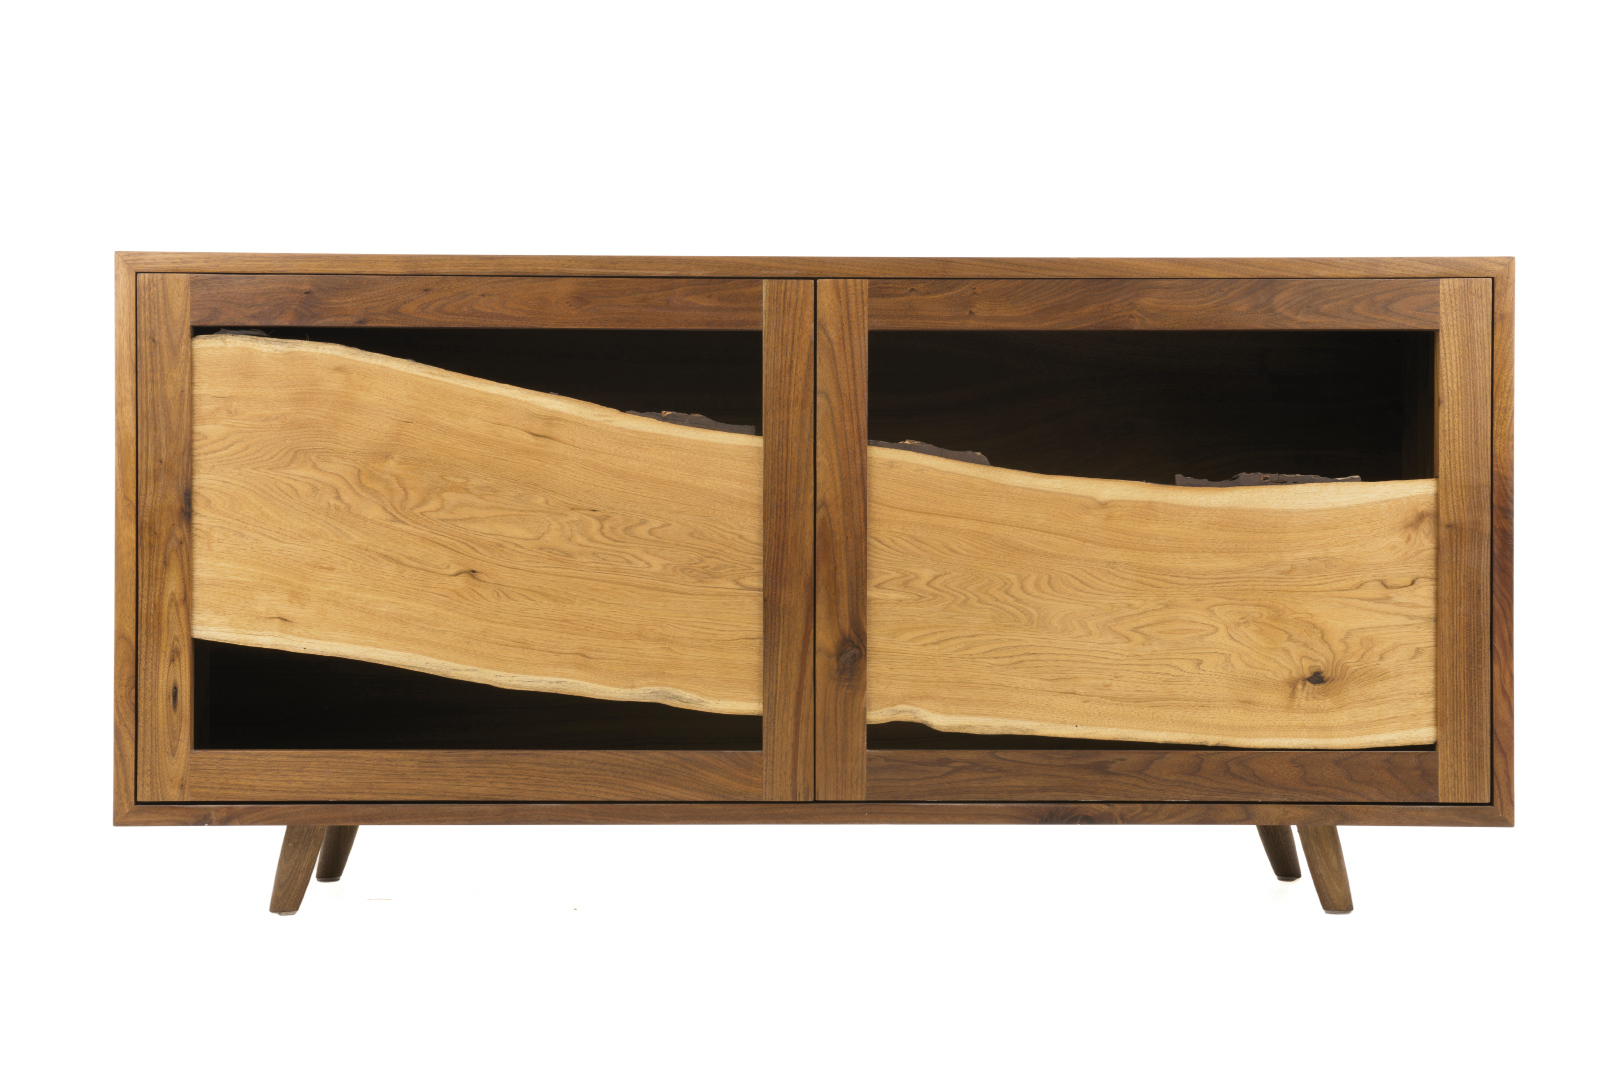 Butternut Sweep cabinet by Moran Woodworked Furniture